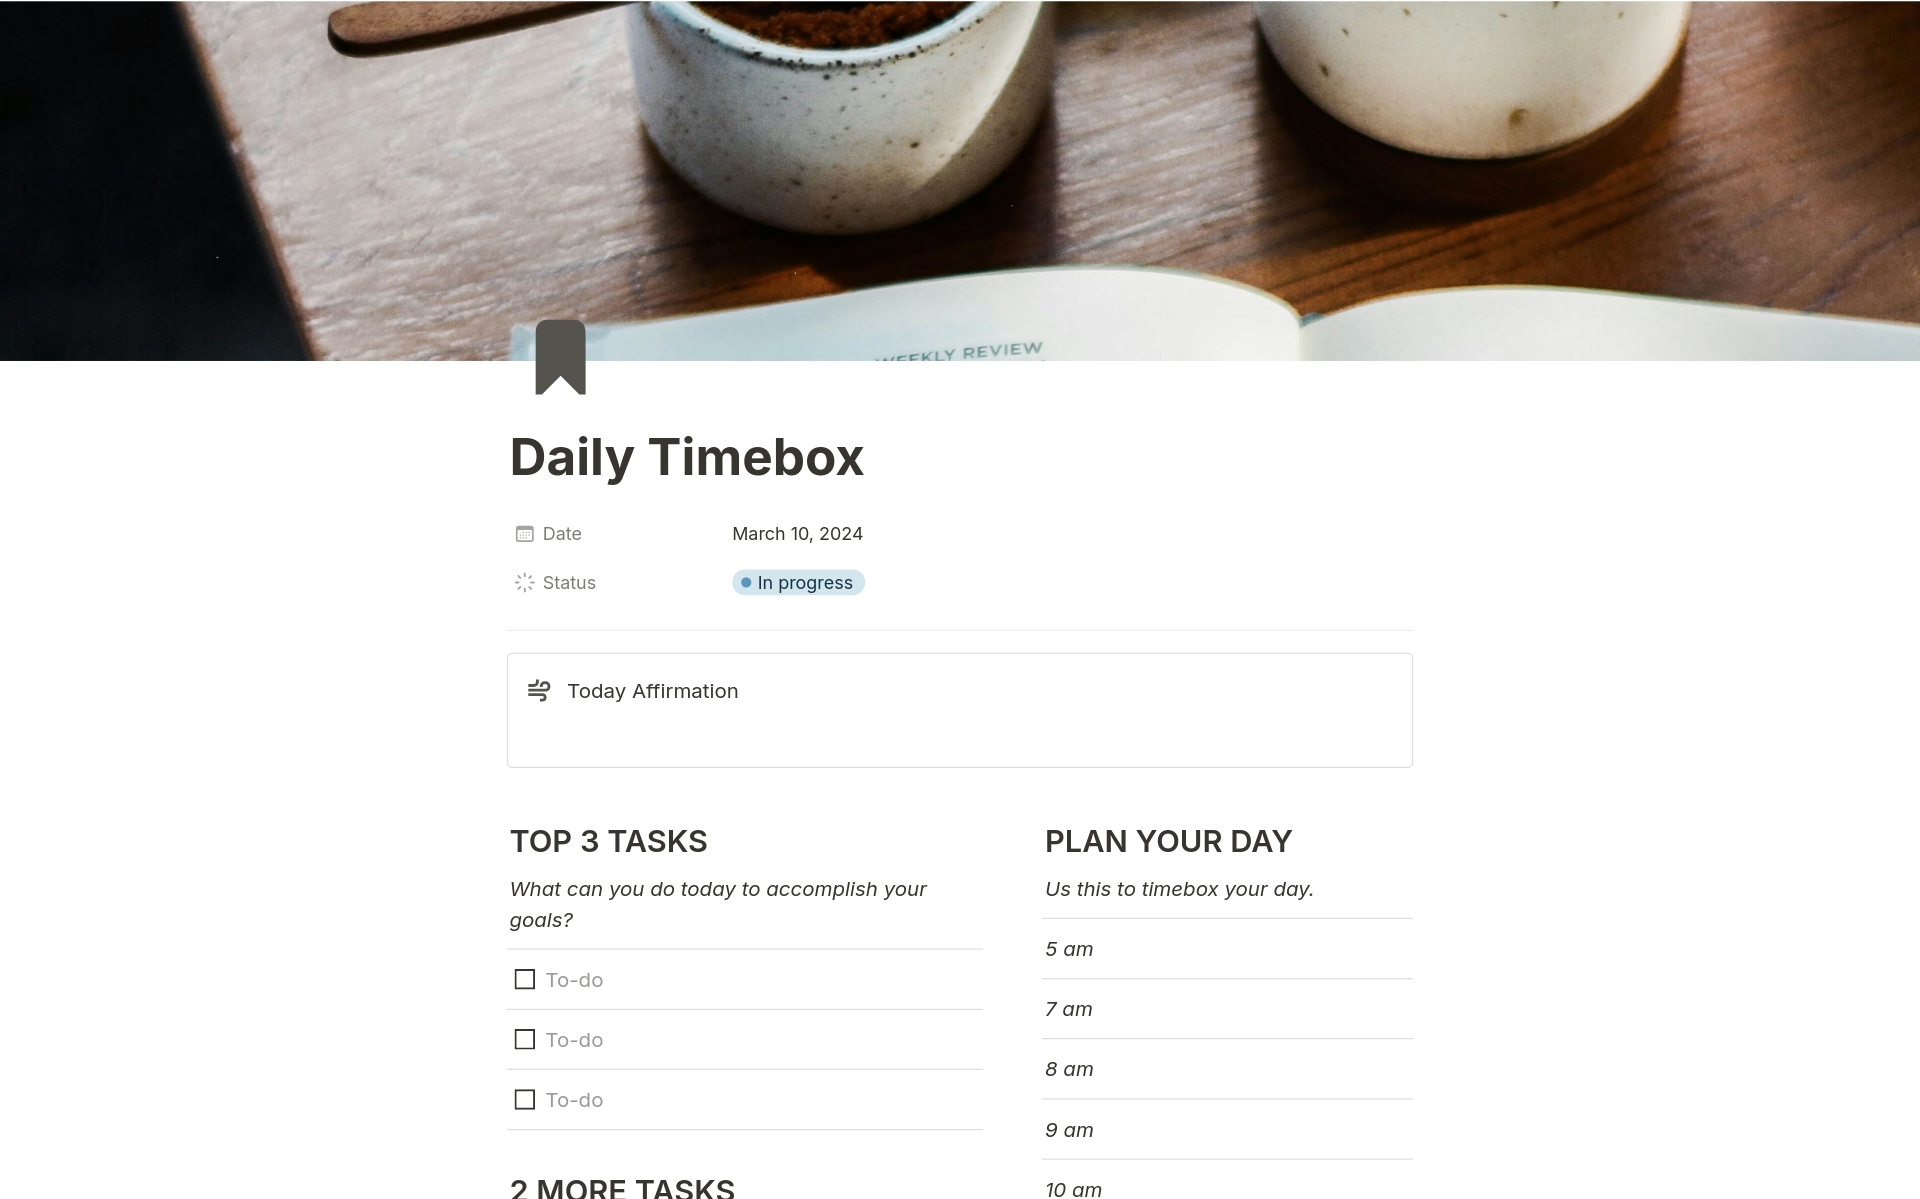 Timeboxing helps you schedule an entire day to maximize productivity.
You’ll check items off your to-do list in the most efficient way possible.